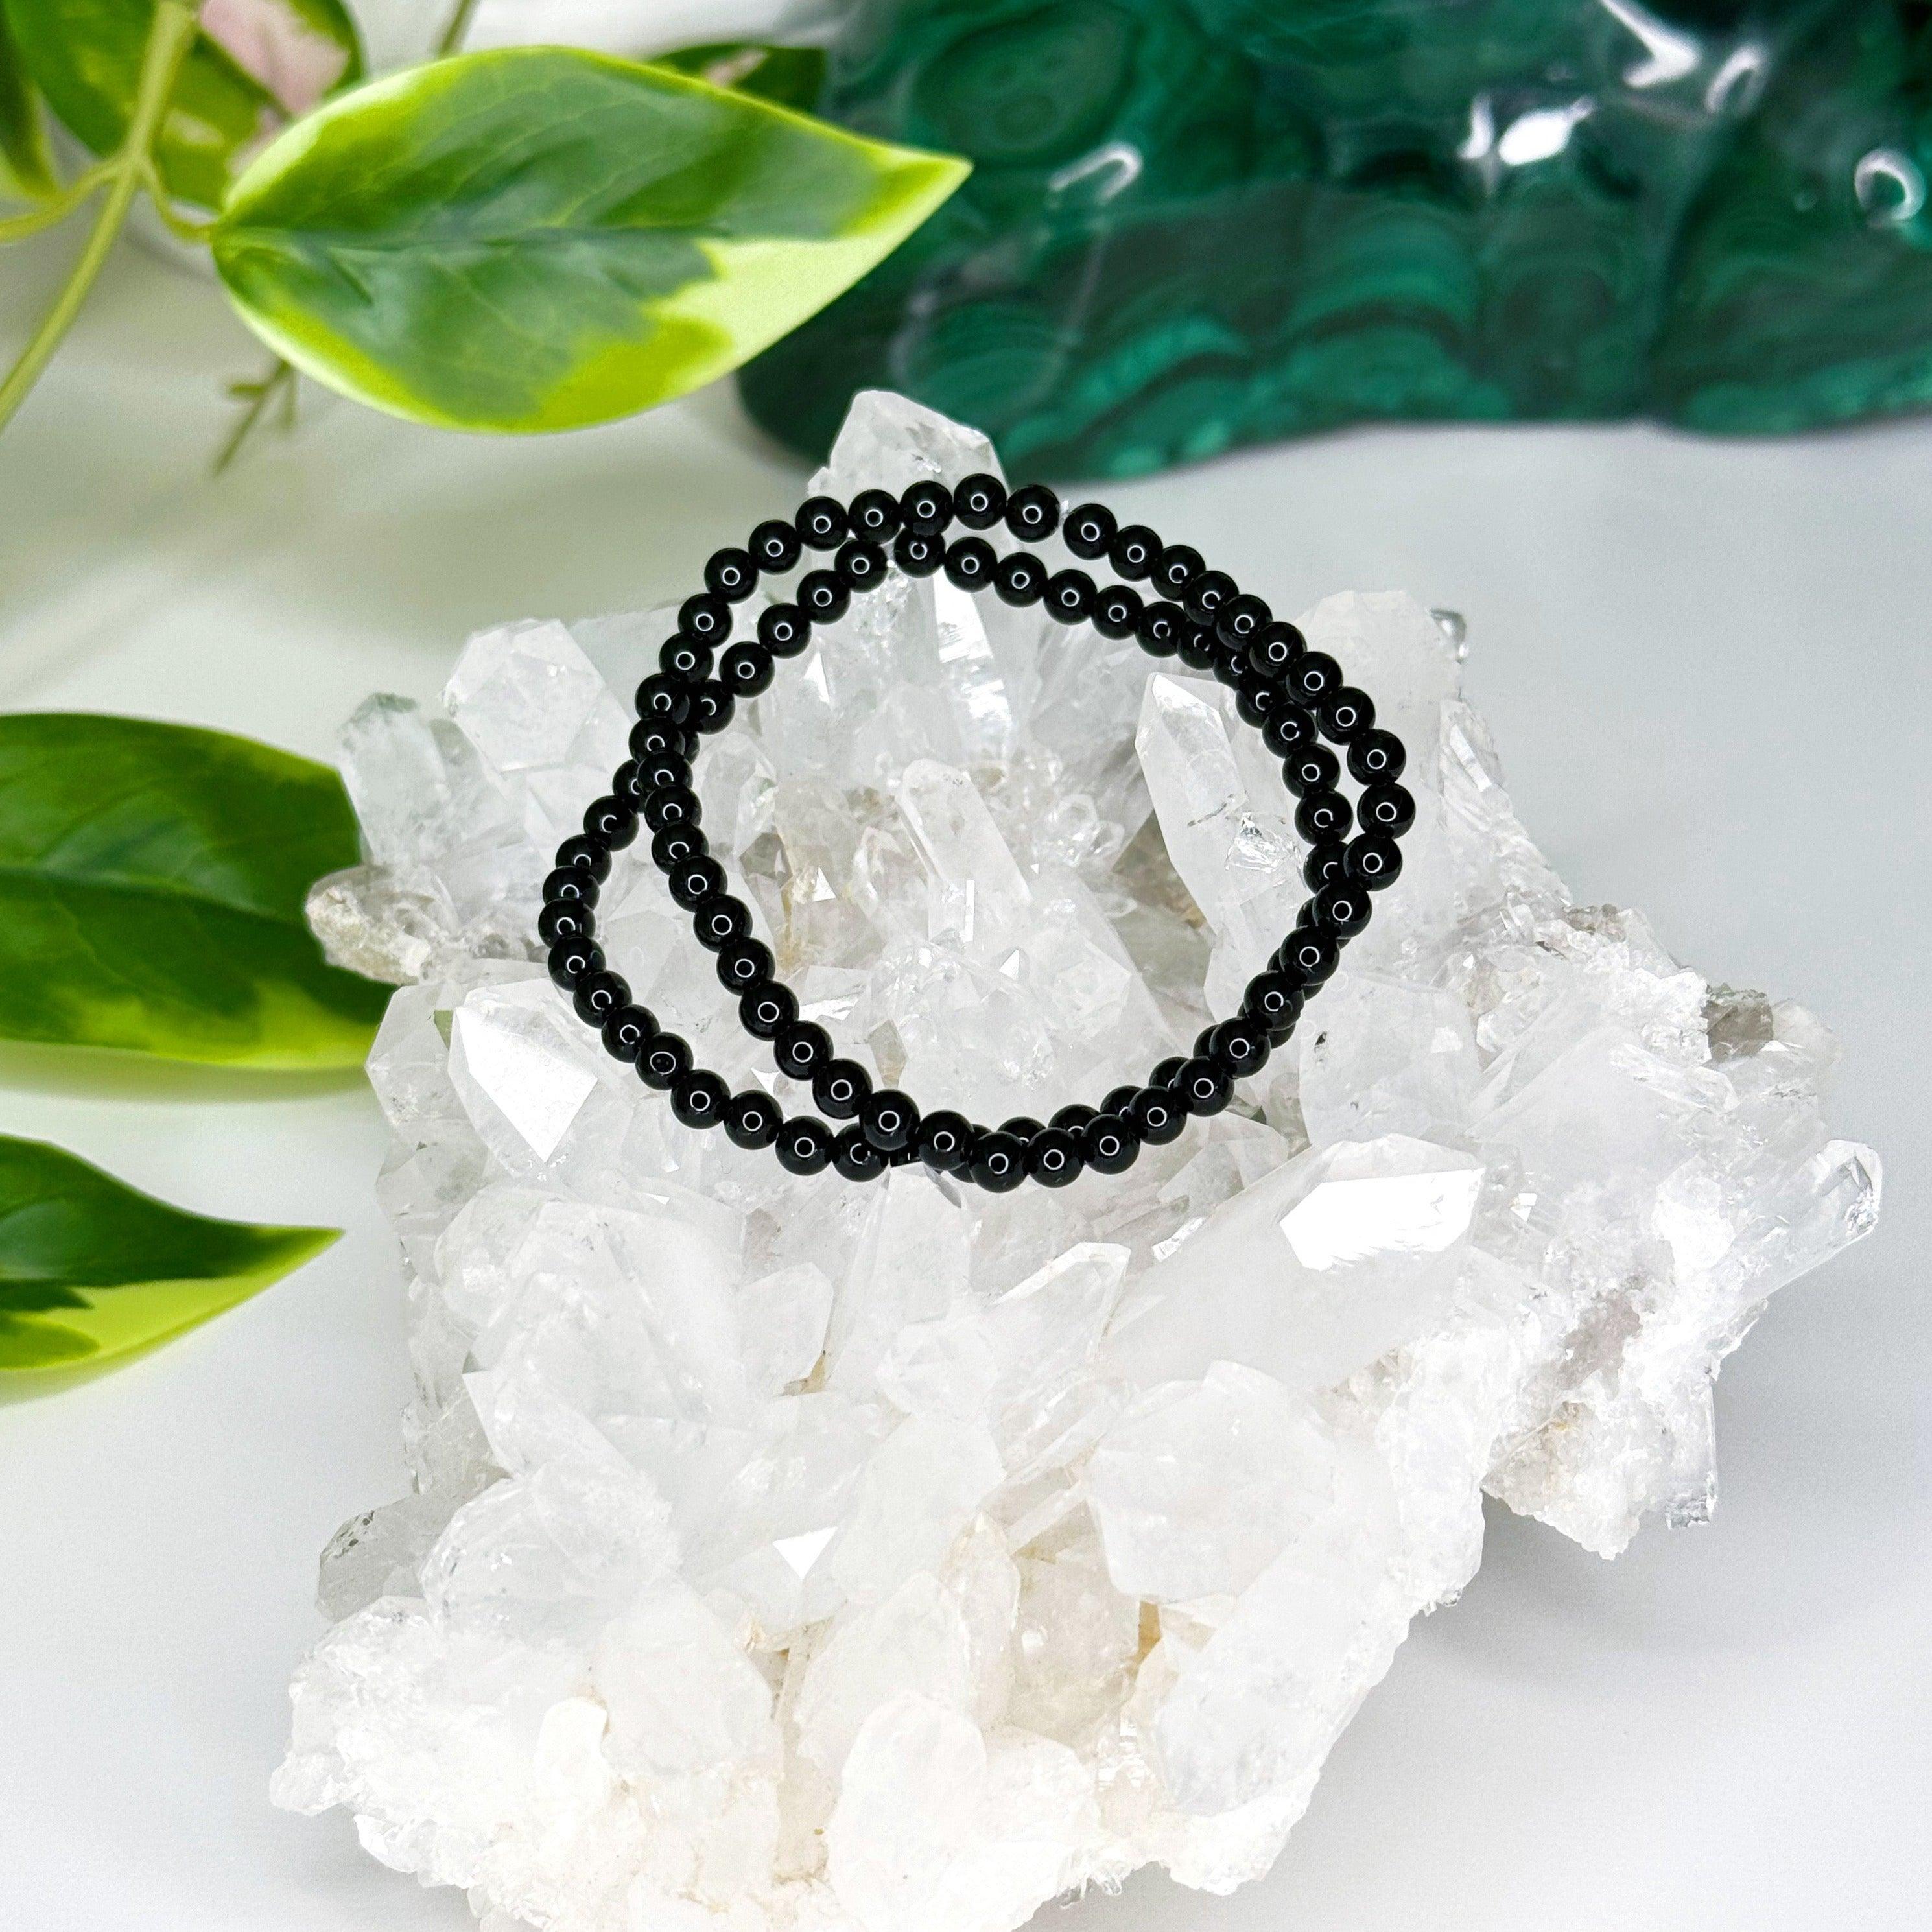 BLACK ONYX 4mm - HANDMADE CRYSTAL BRACELET - 4mm, black, black onyx, bracelet, crystal bracelet, handmade bracelet, jewelry, market bracelet, protection gift bundle, recently added, solstice collection, Wearable, winter solstice collection - The Mineral Maven